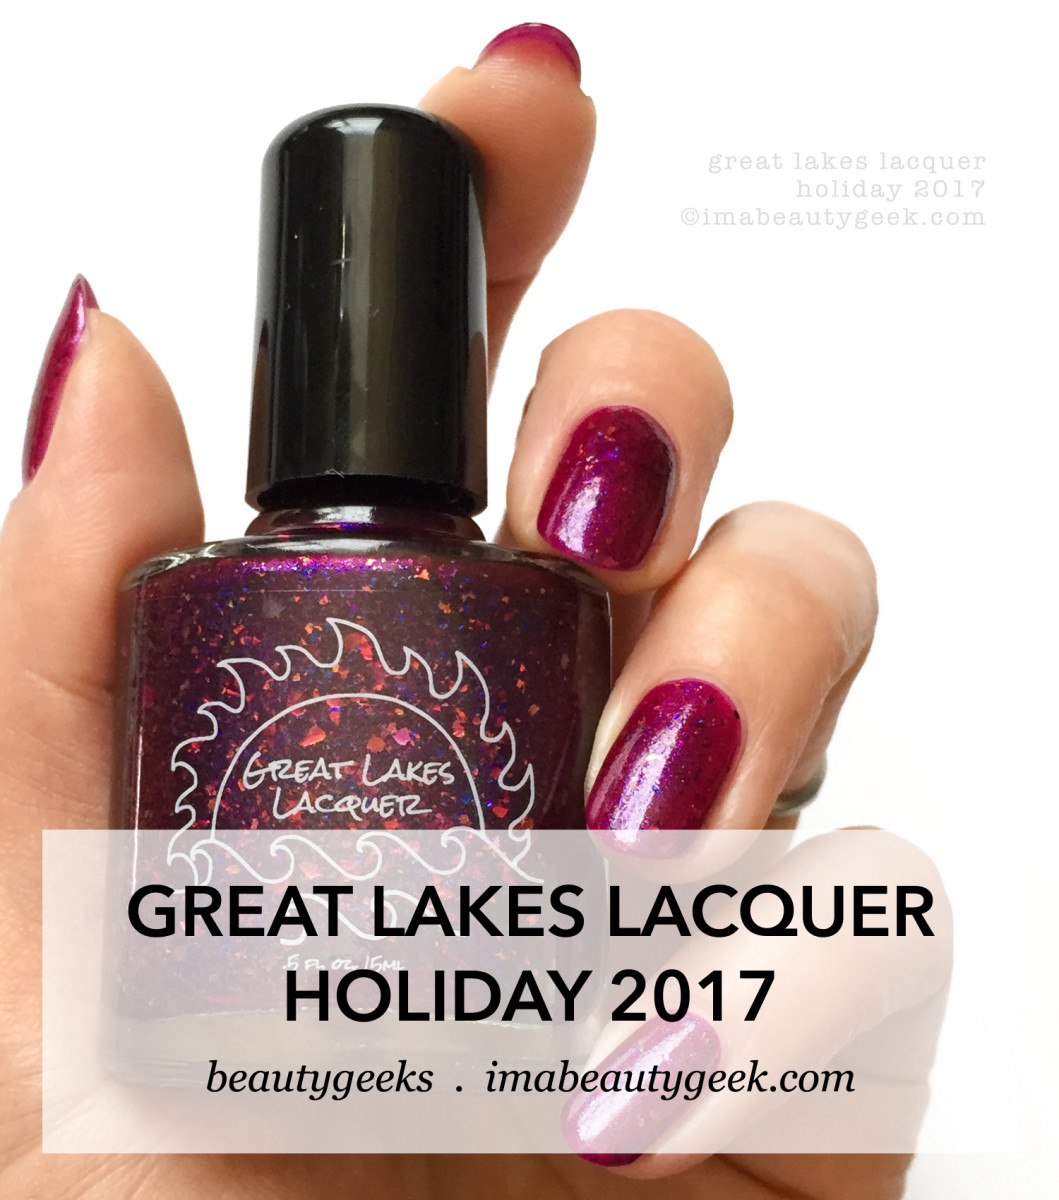 Great Lakes Lacquer Holiday 2017 and Black Friday-BEAUTYGEEKS